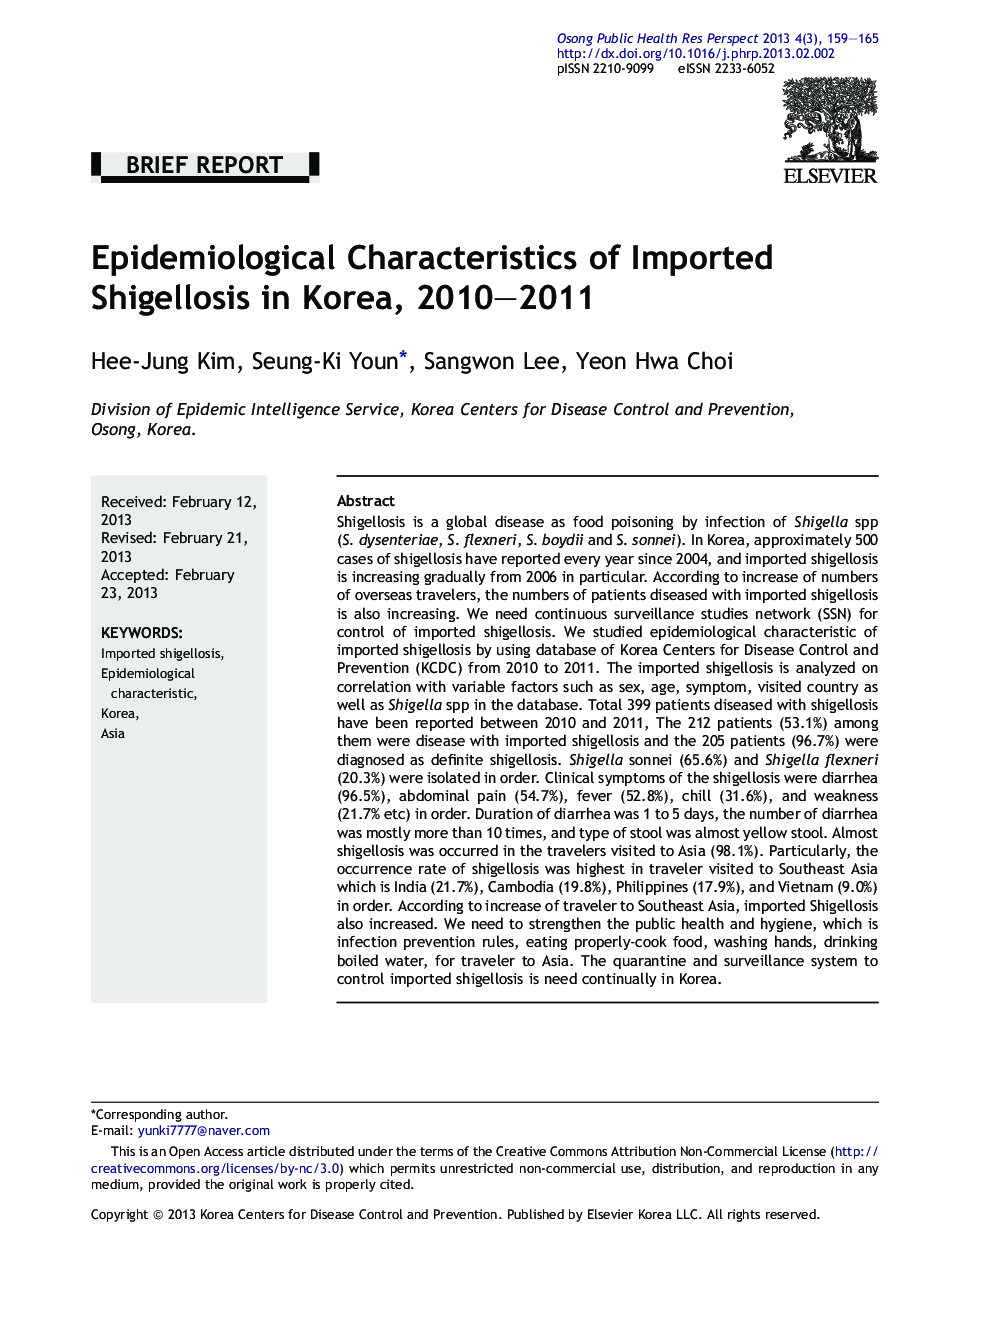 Epidemiological Characteristics of Imported Shigellosis in Korea, 2010–2011 